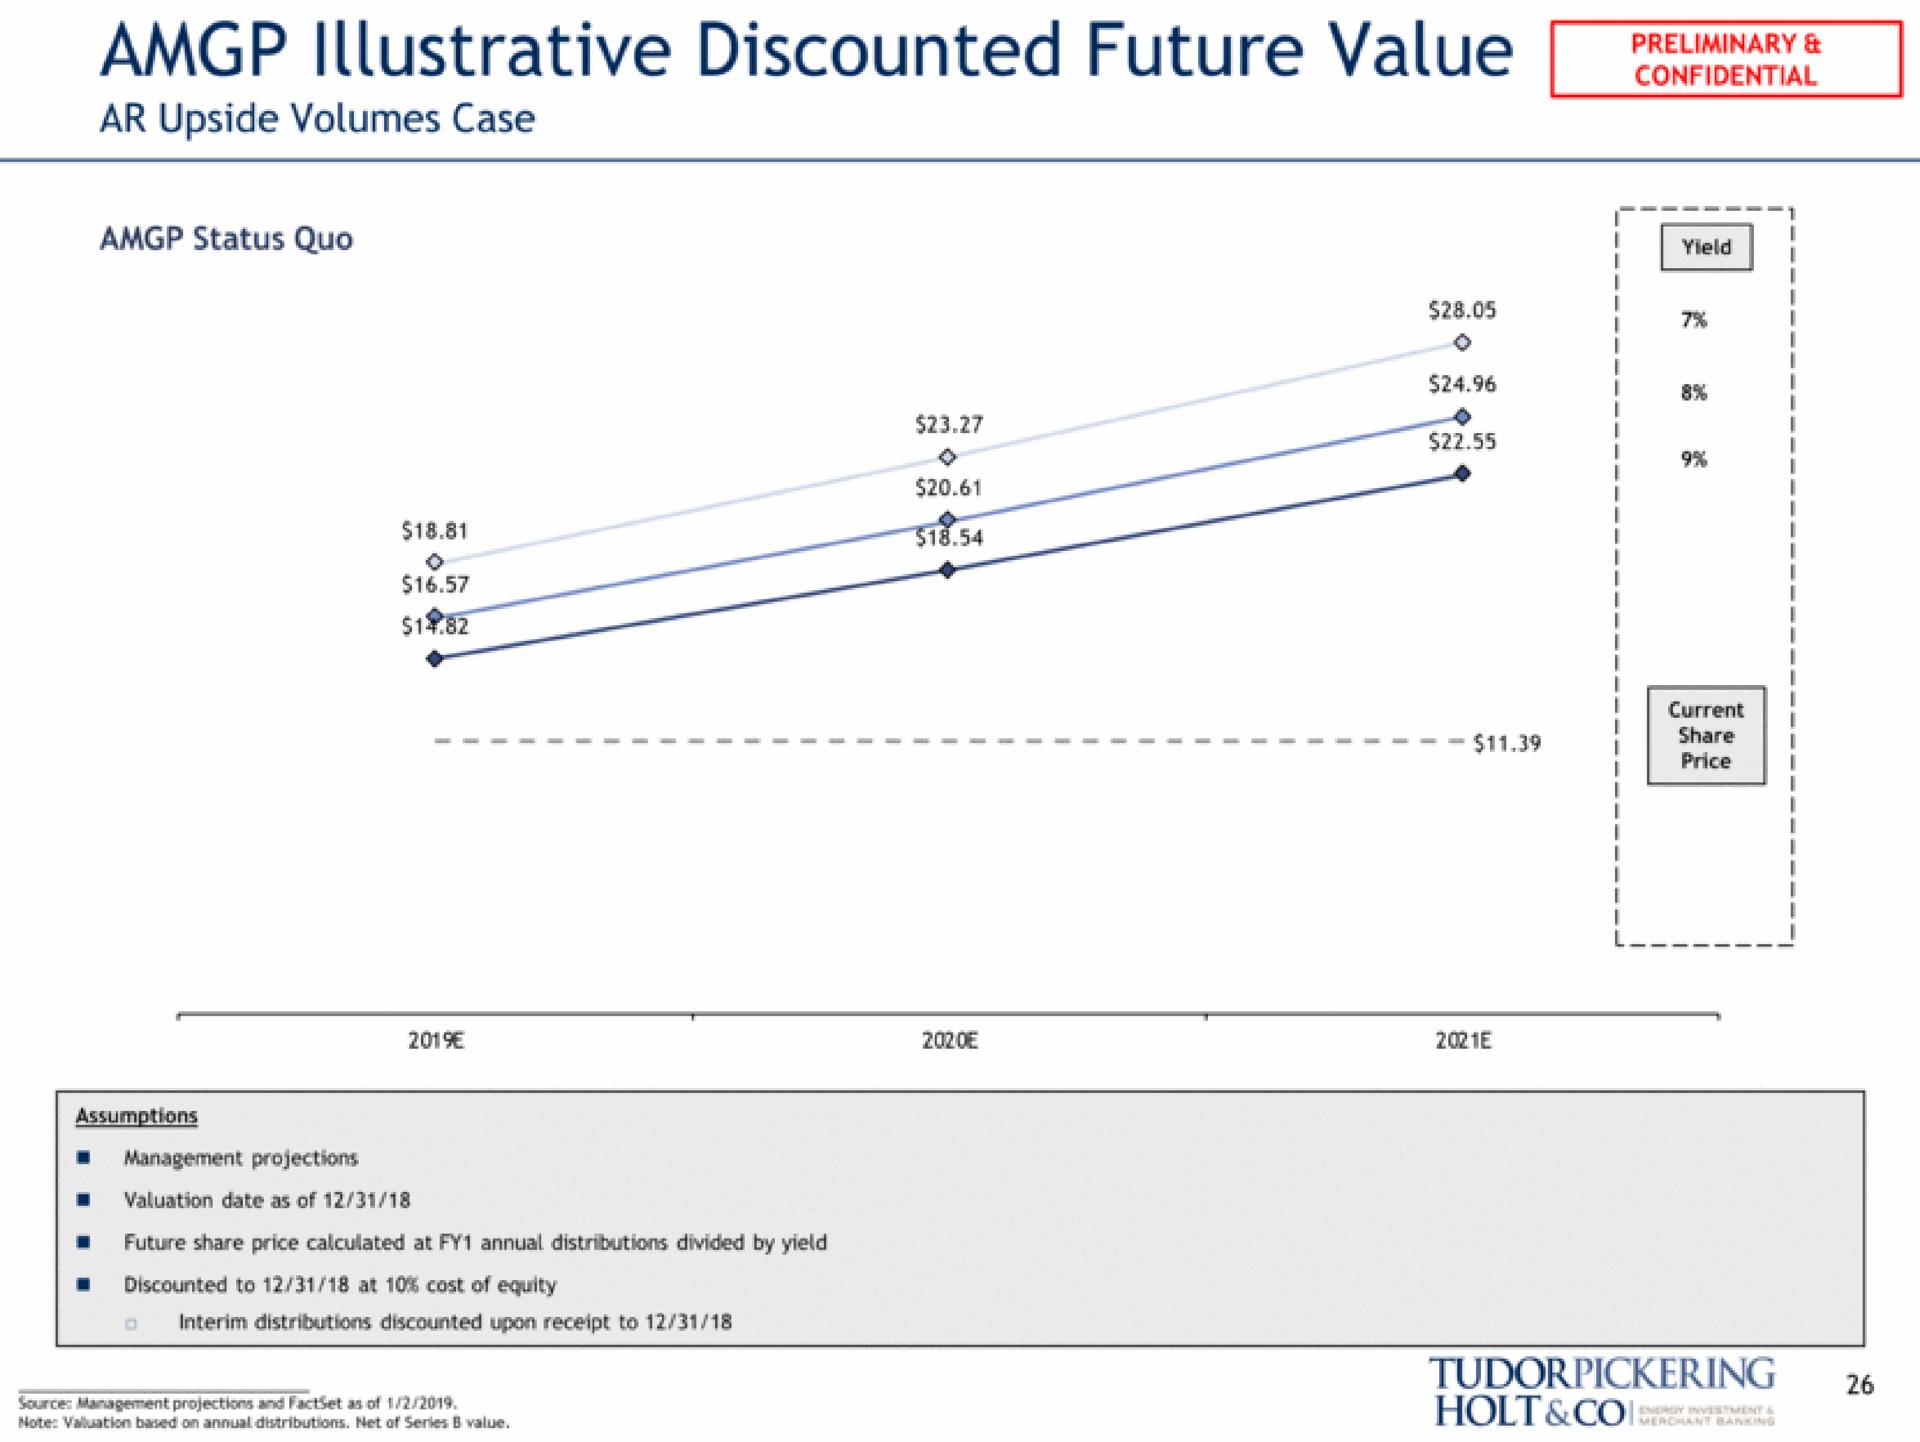 illustrative discounted future value upside volumes case note based on annul net of series value holt | Tudor, Pickering, Holt & Co